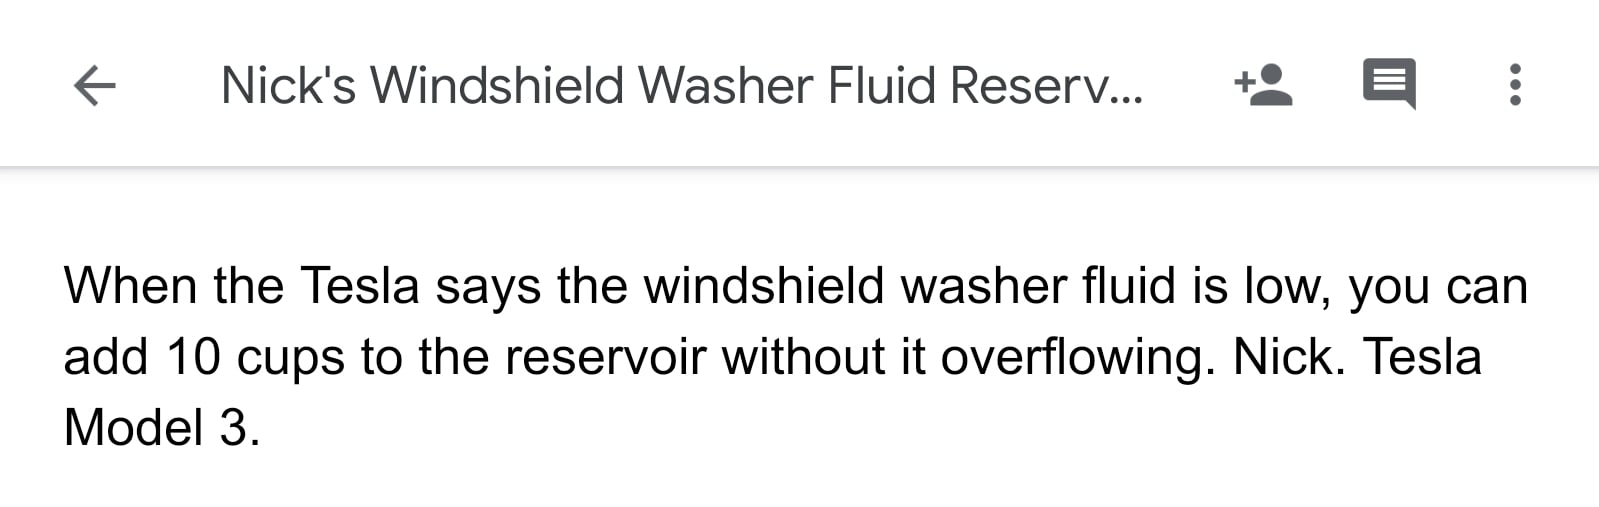 Windshield Wiper Fluid and Recommendation